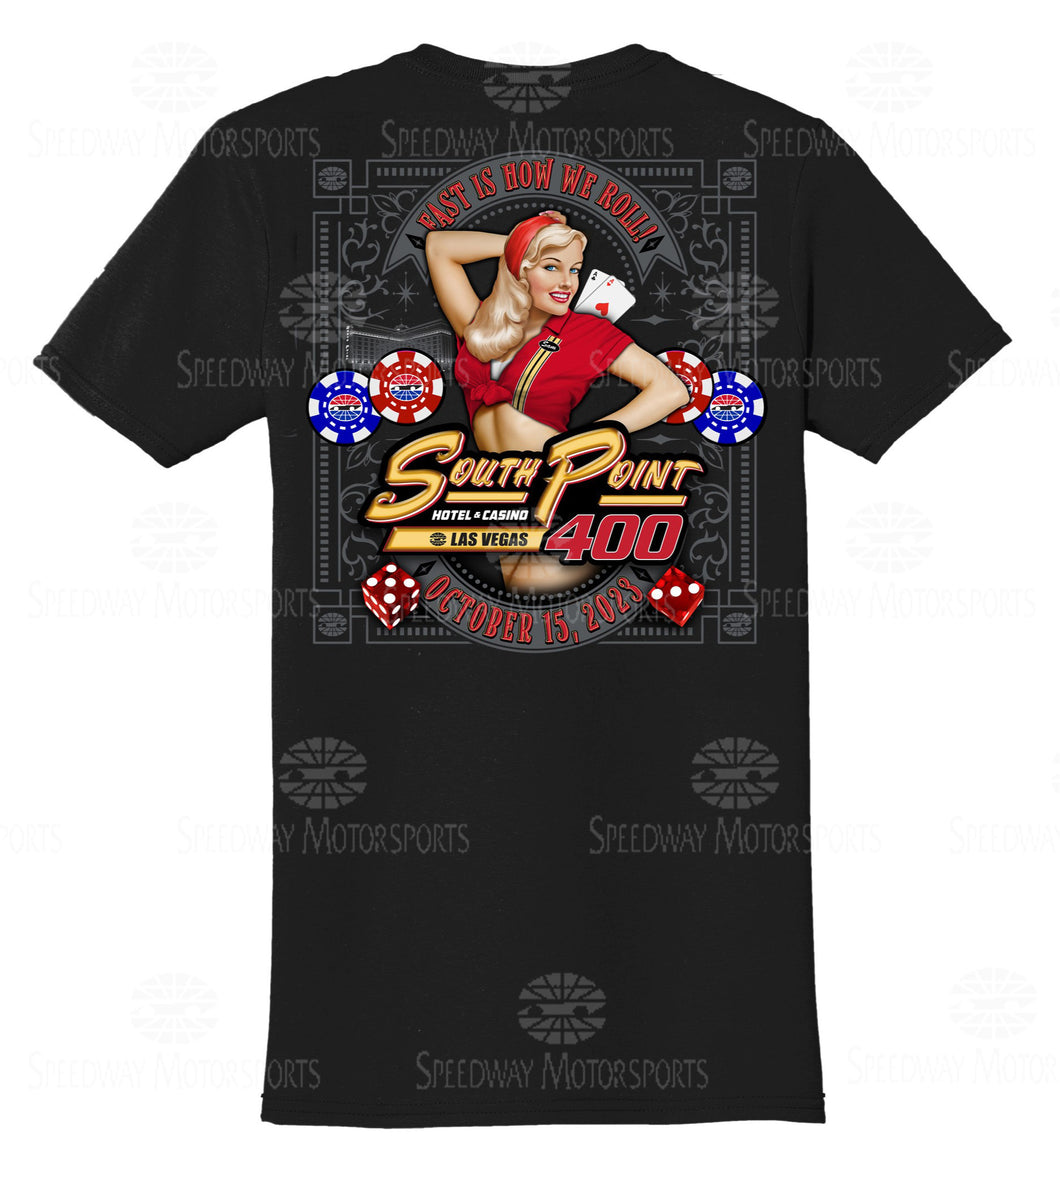 SP400 PINUP EVENT TEE Blk